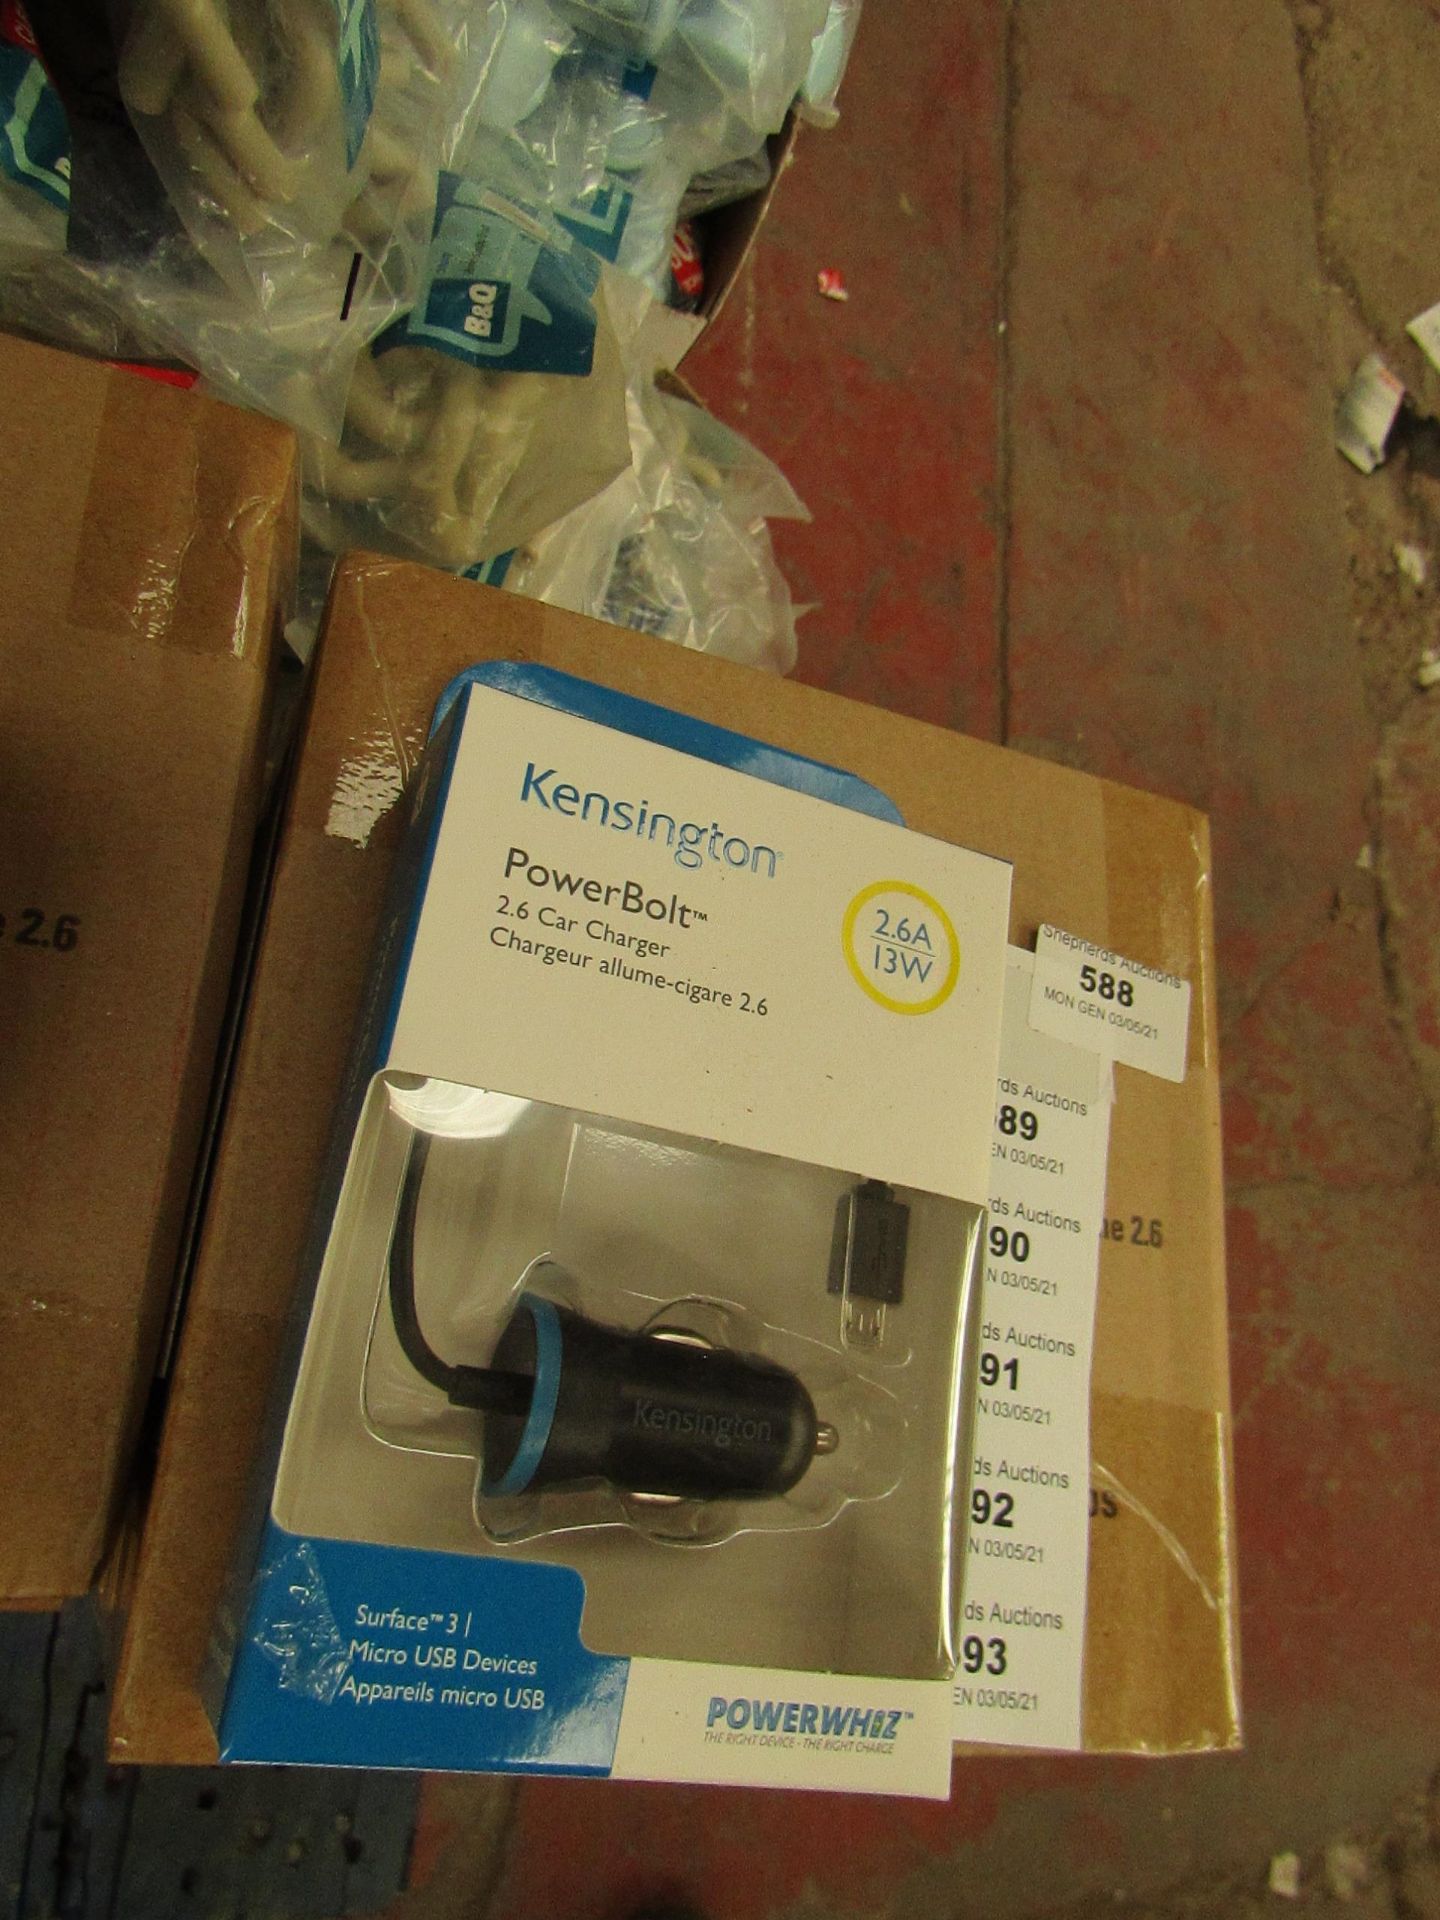 5x Kensington PowerBolt 2.4 Car Charger (made for iPod, iPhone & iPad) - New & Boxed.